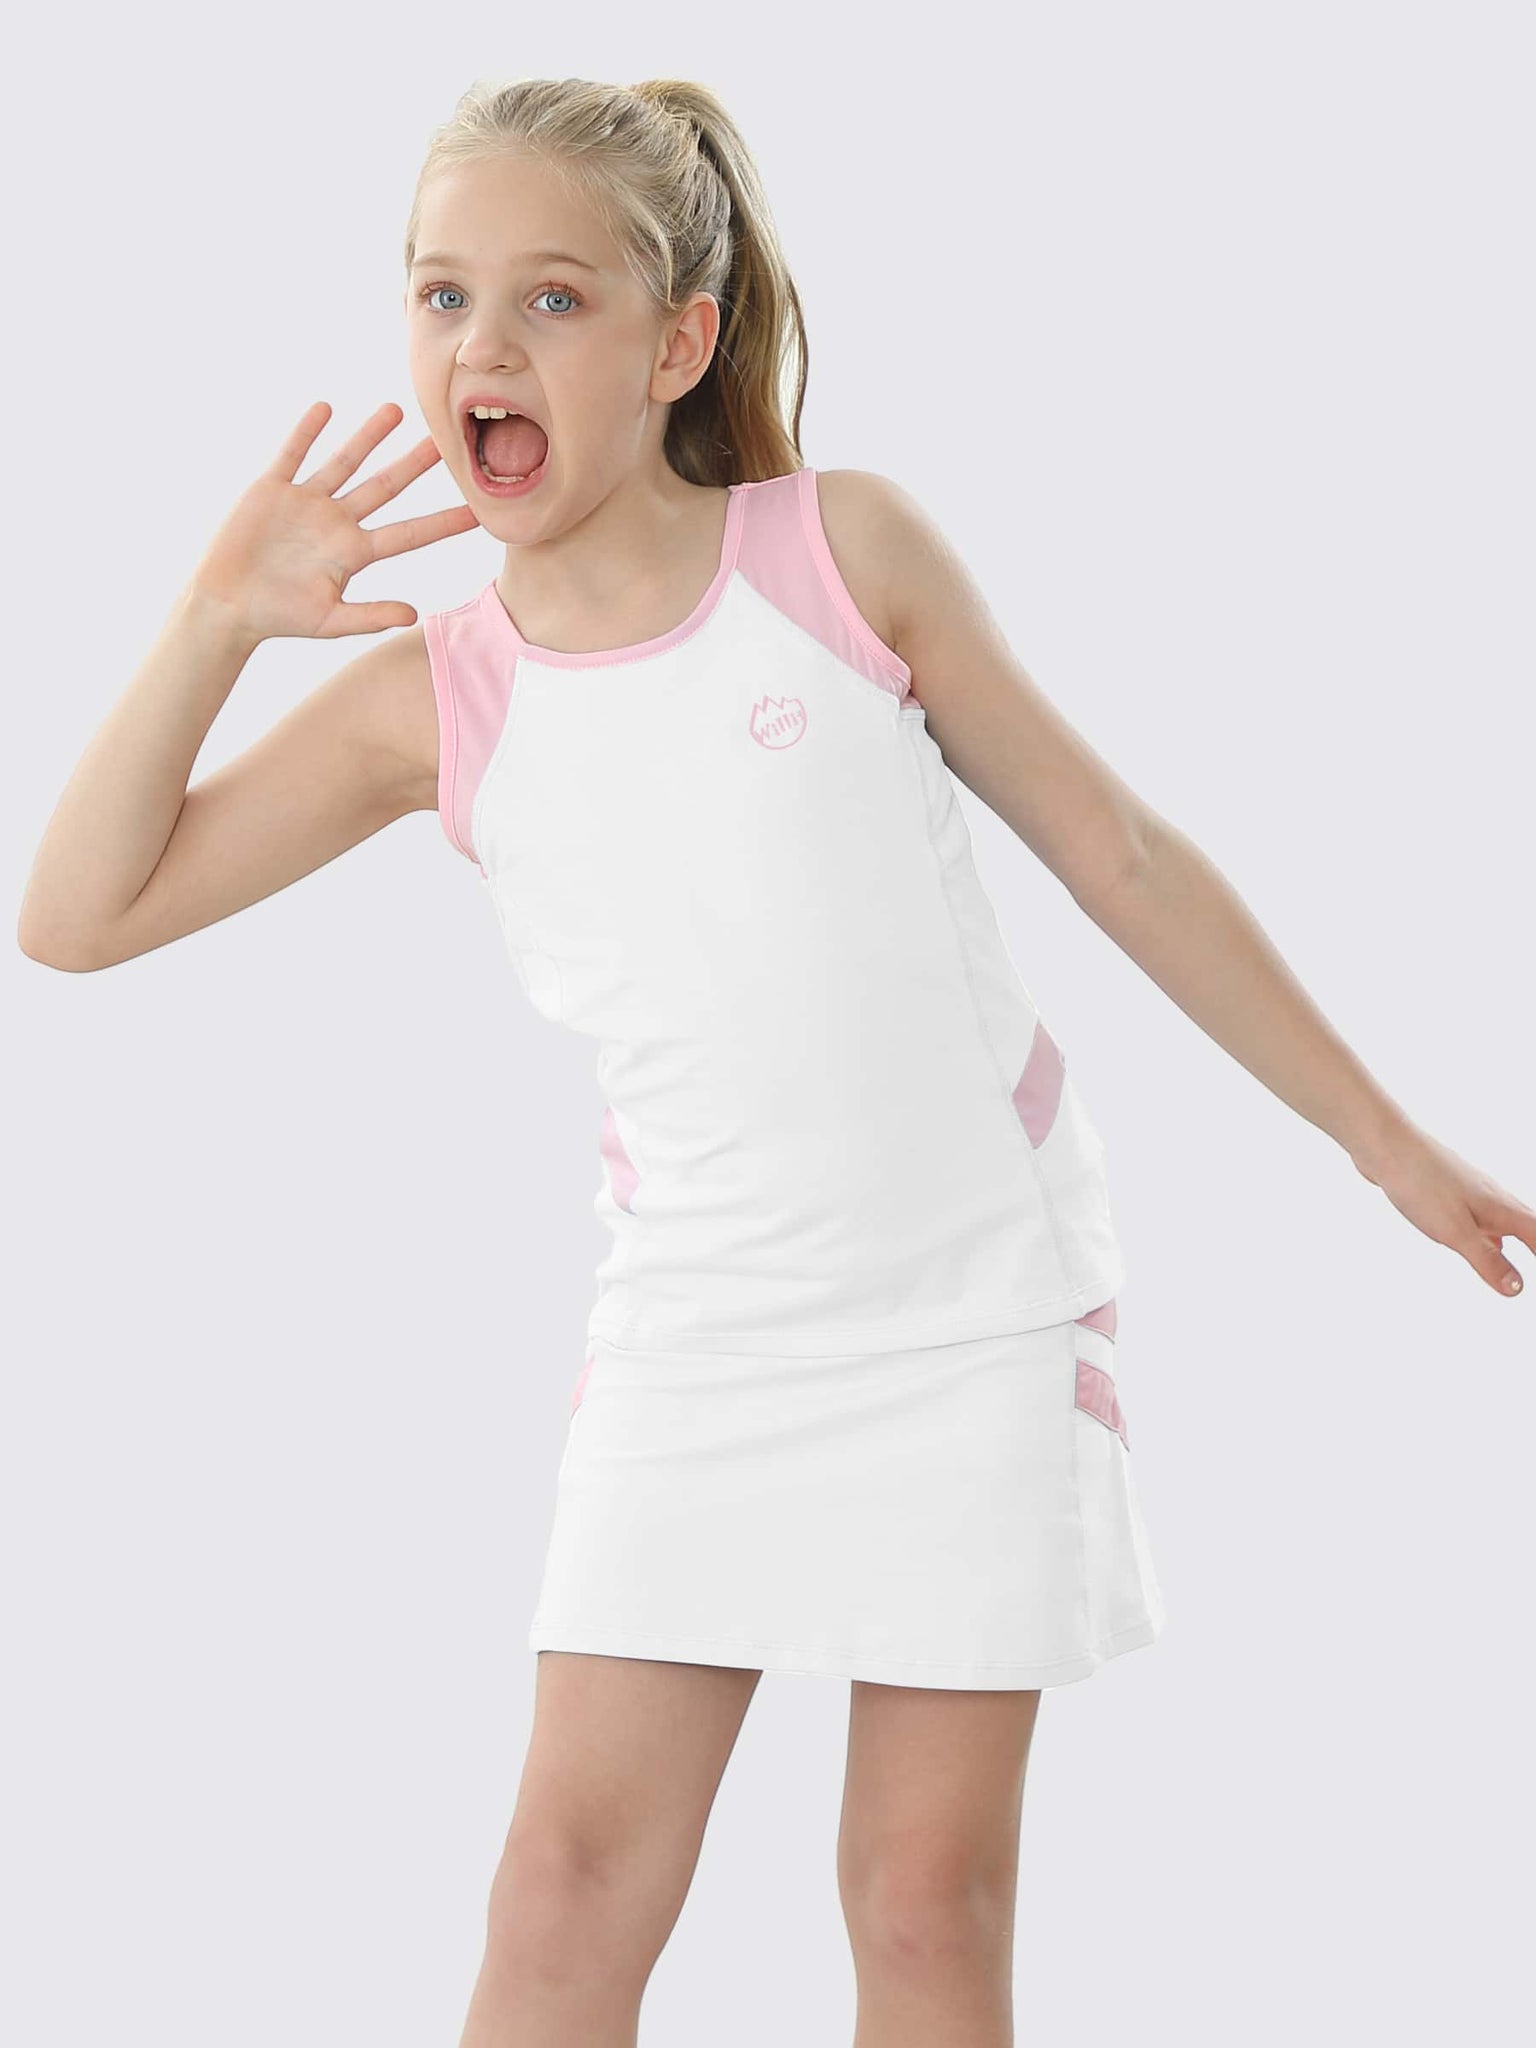 Willit Girls' Tennis Outfit_White_model1